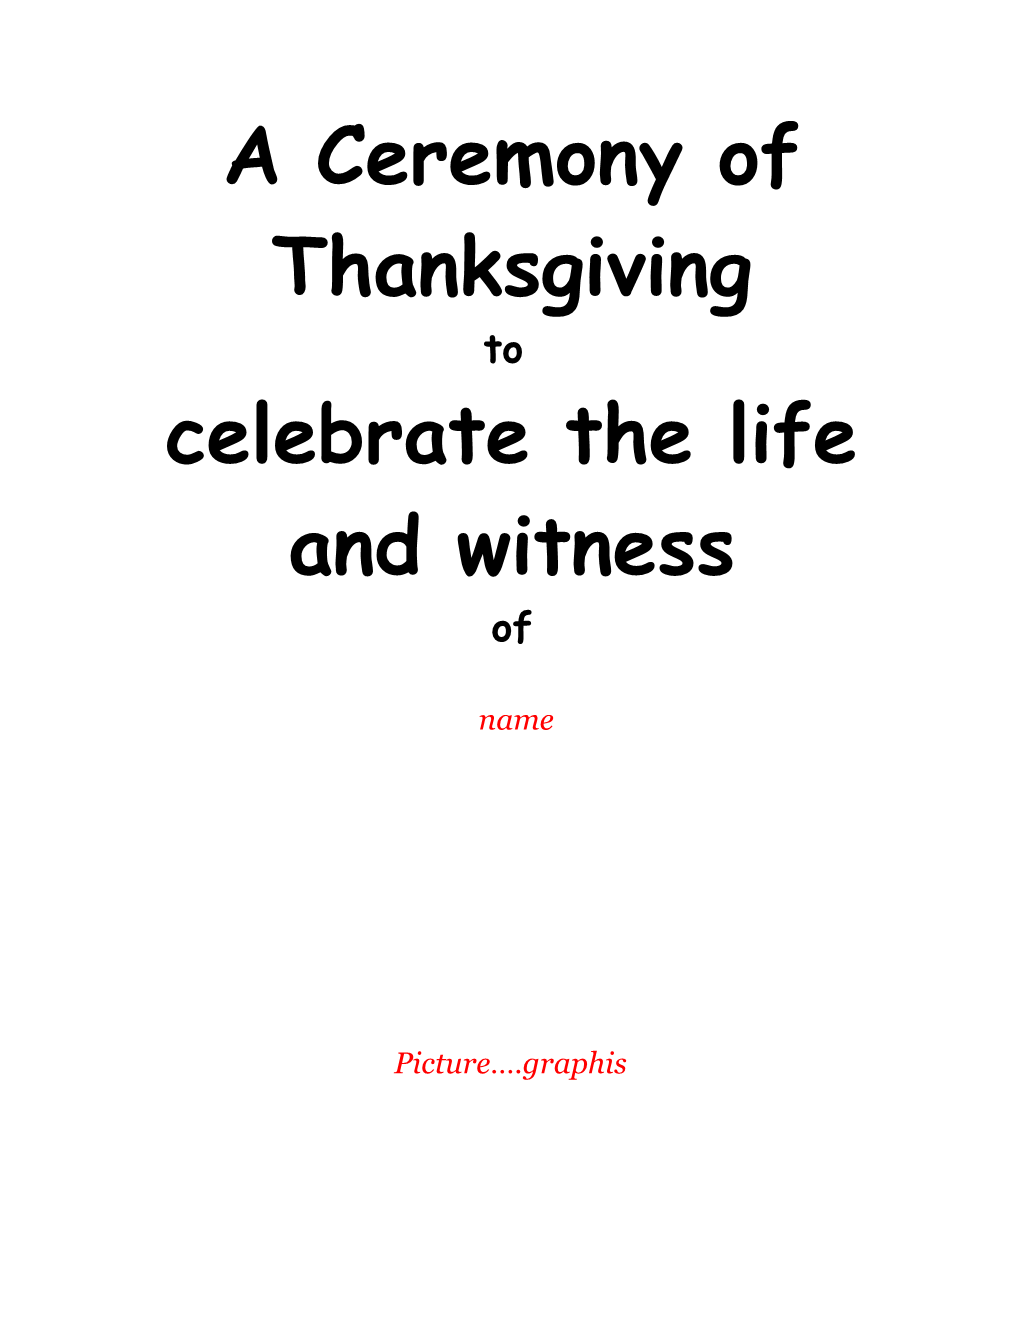 Celebrate the Life and Witness